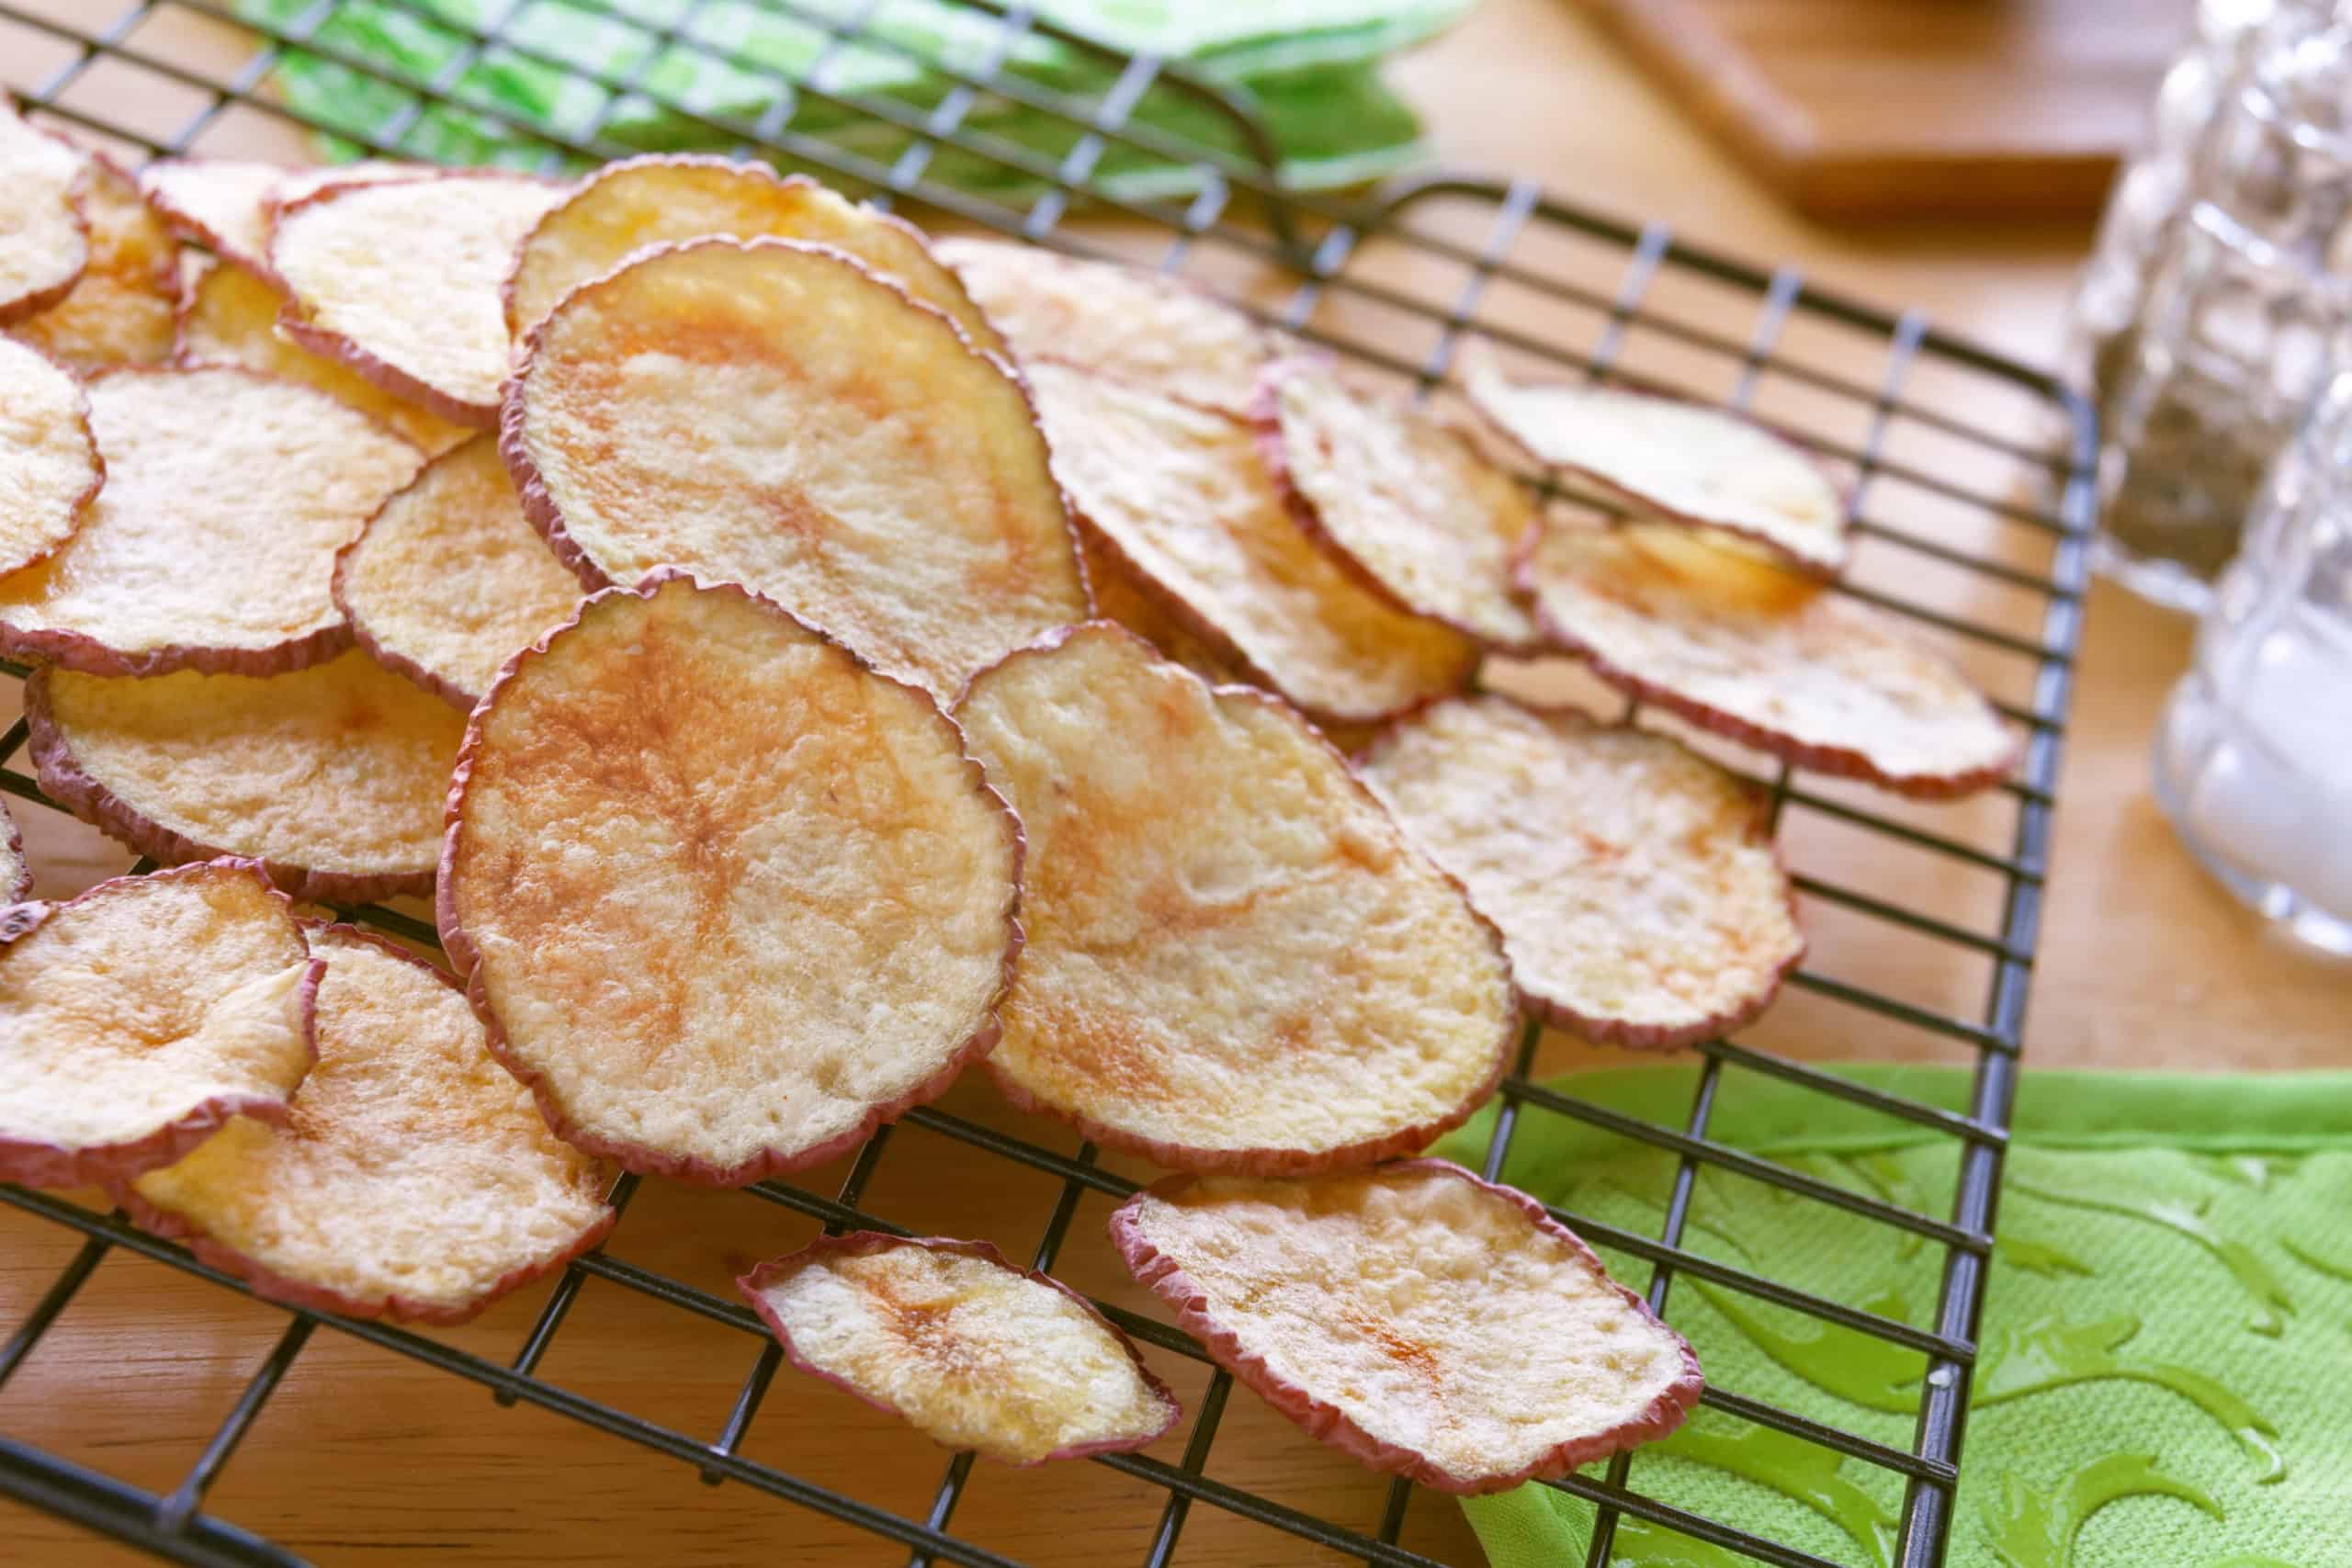 Cheap paradise: Daiso's microwave potato chip maker is healthy